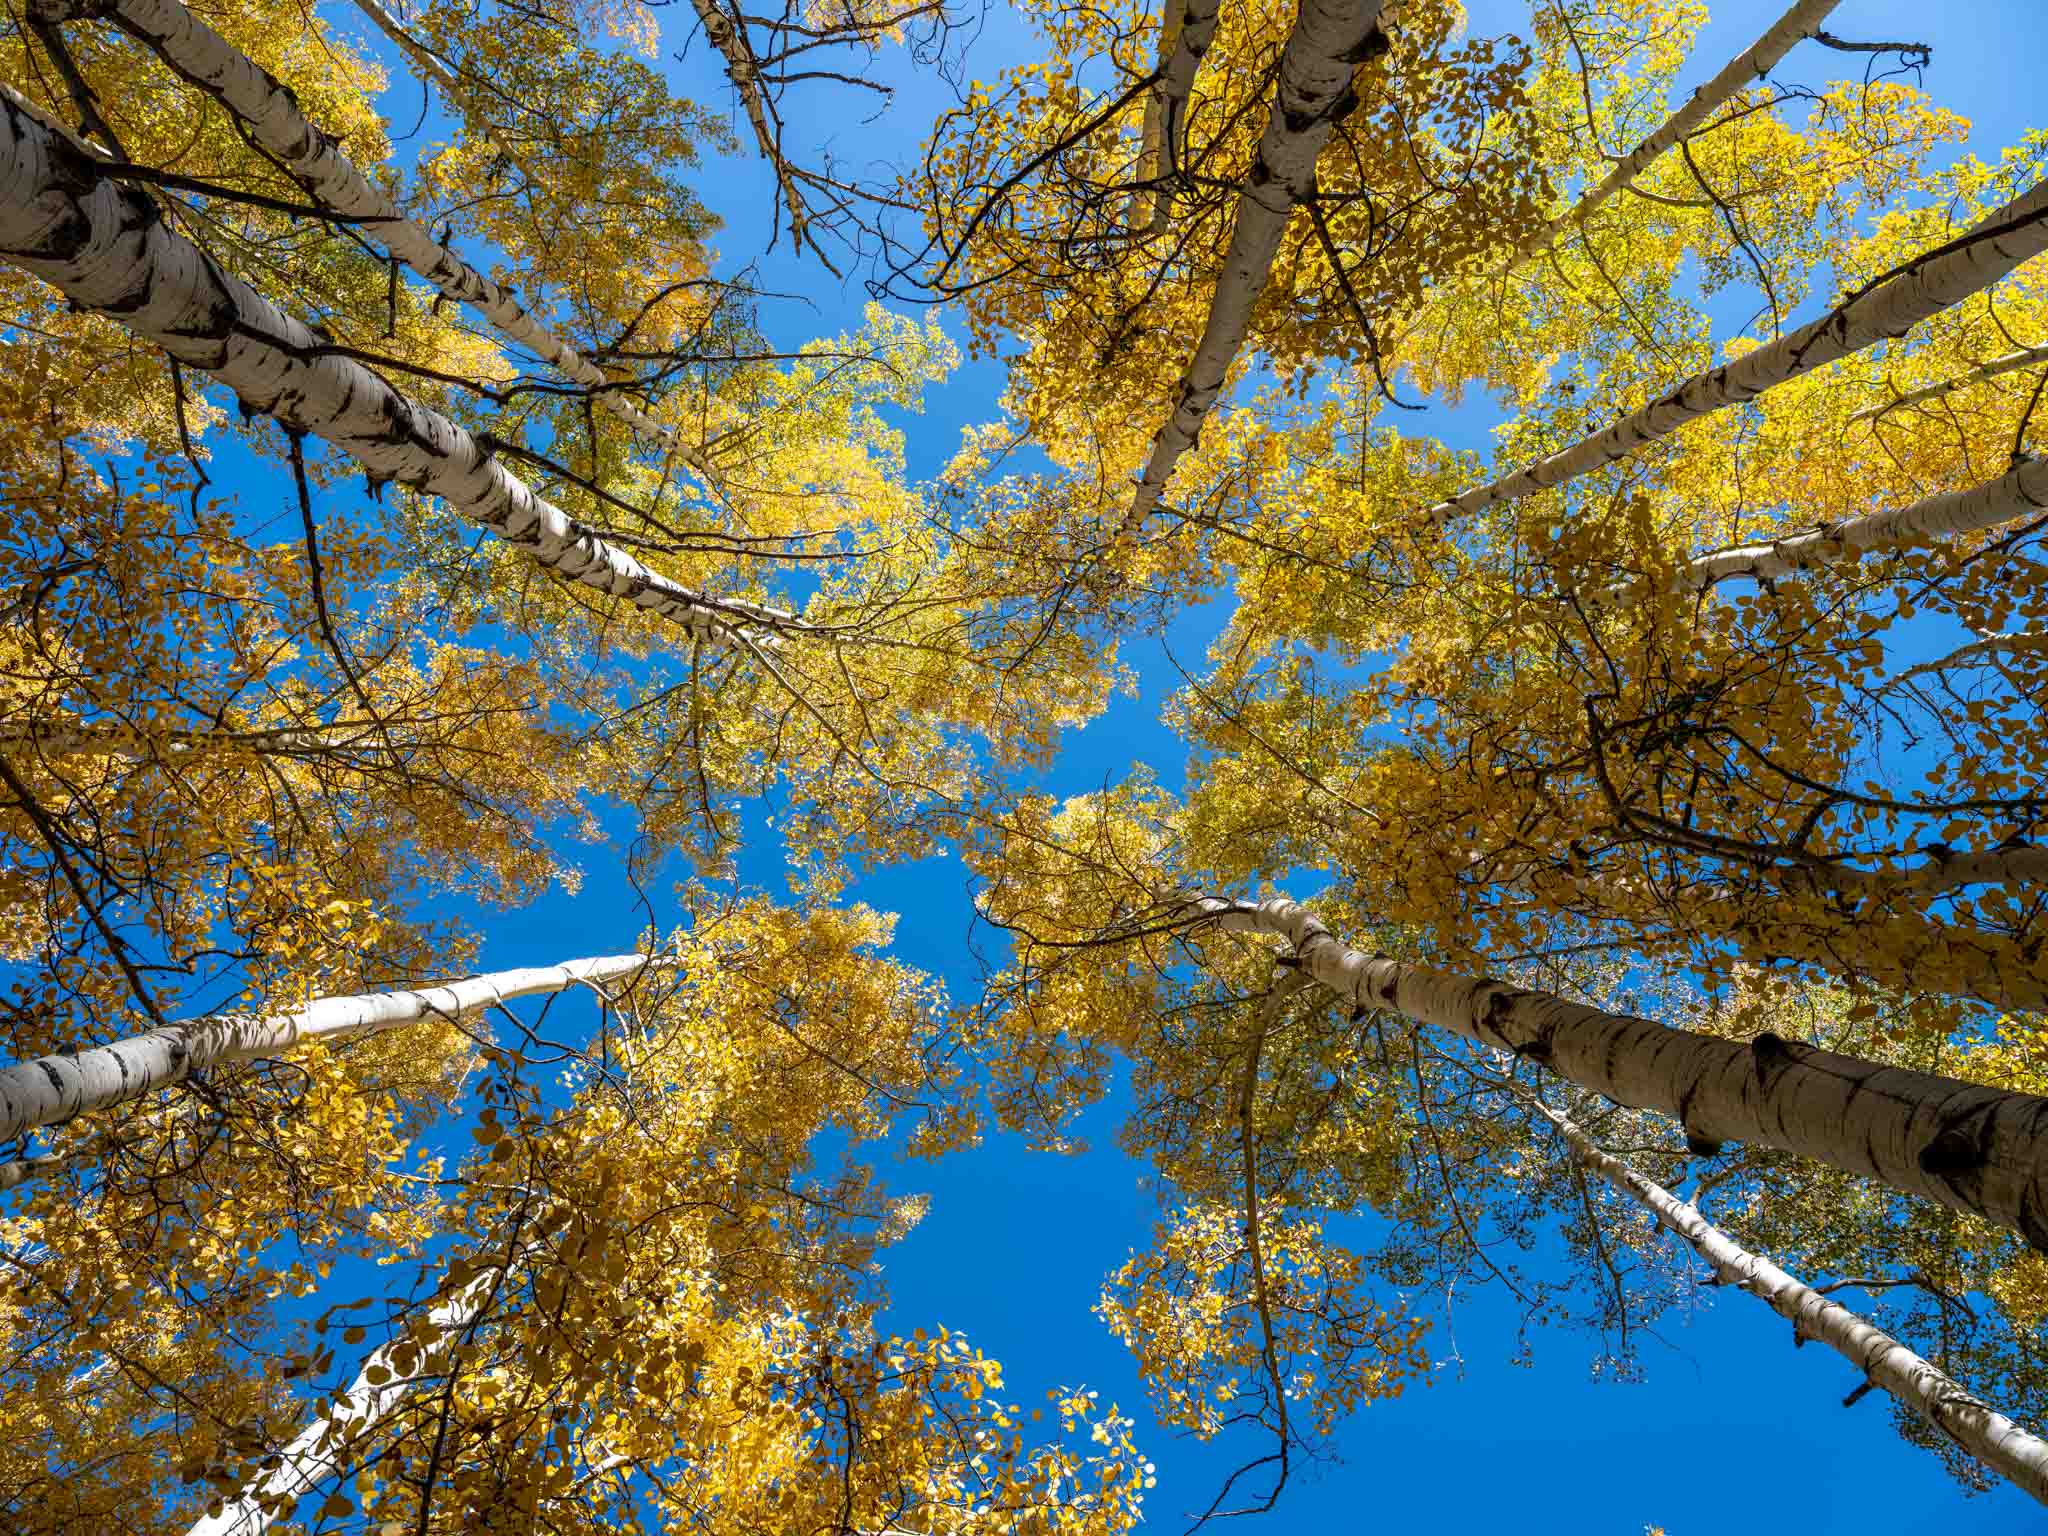 looking up a group of trees with yellow leaves